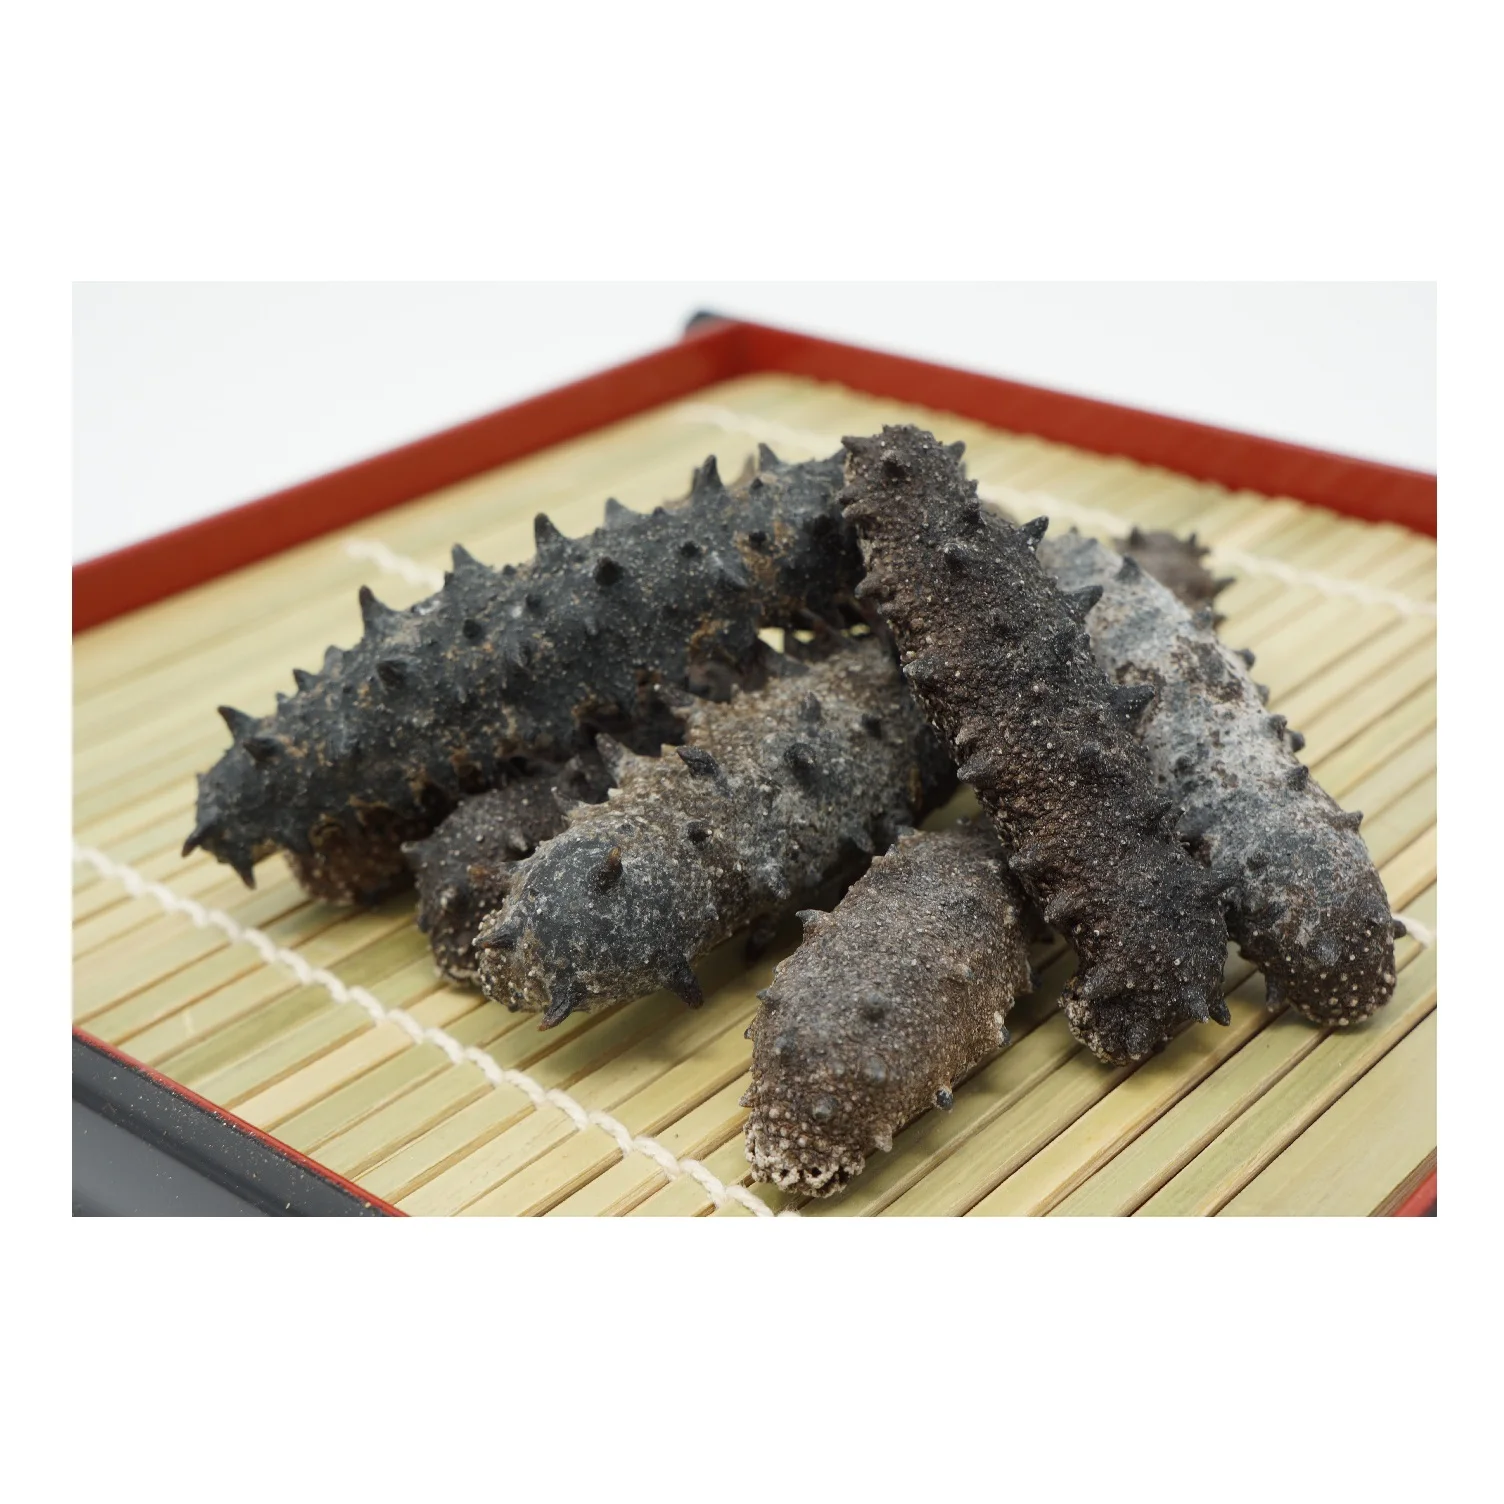 Direct Supplier Of Dried Sea Cucumber - Dried Seafood At Wholesale ...